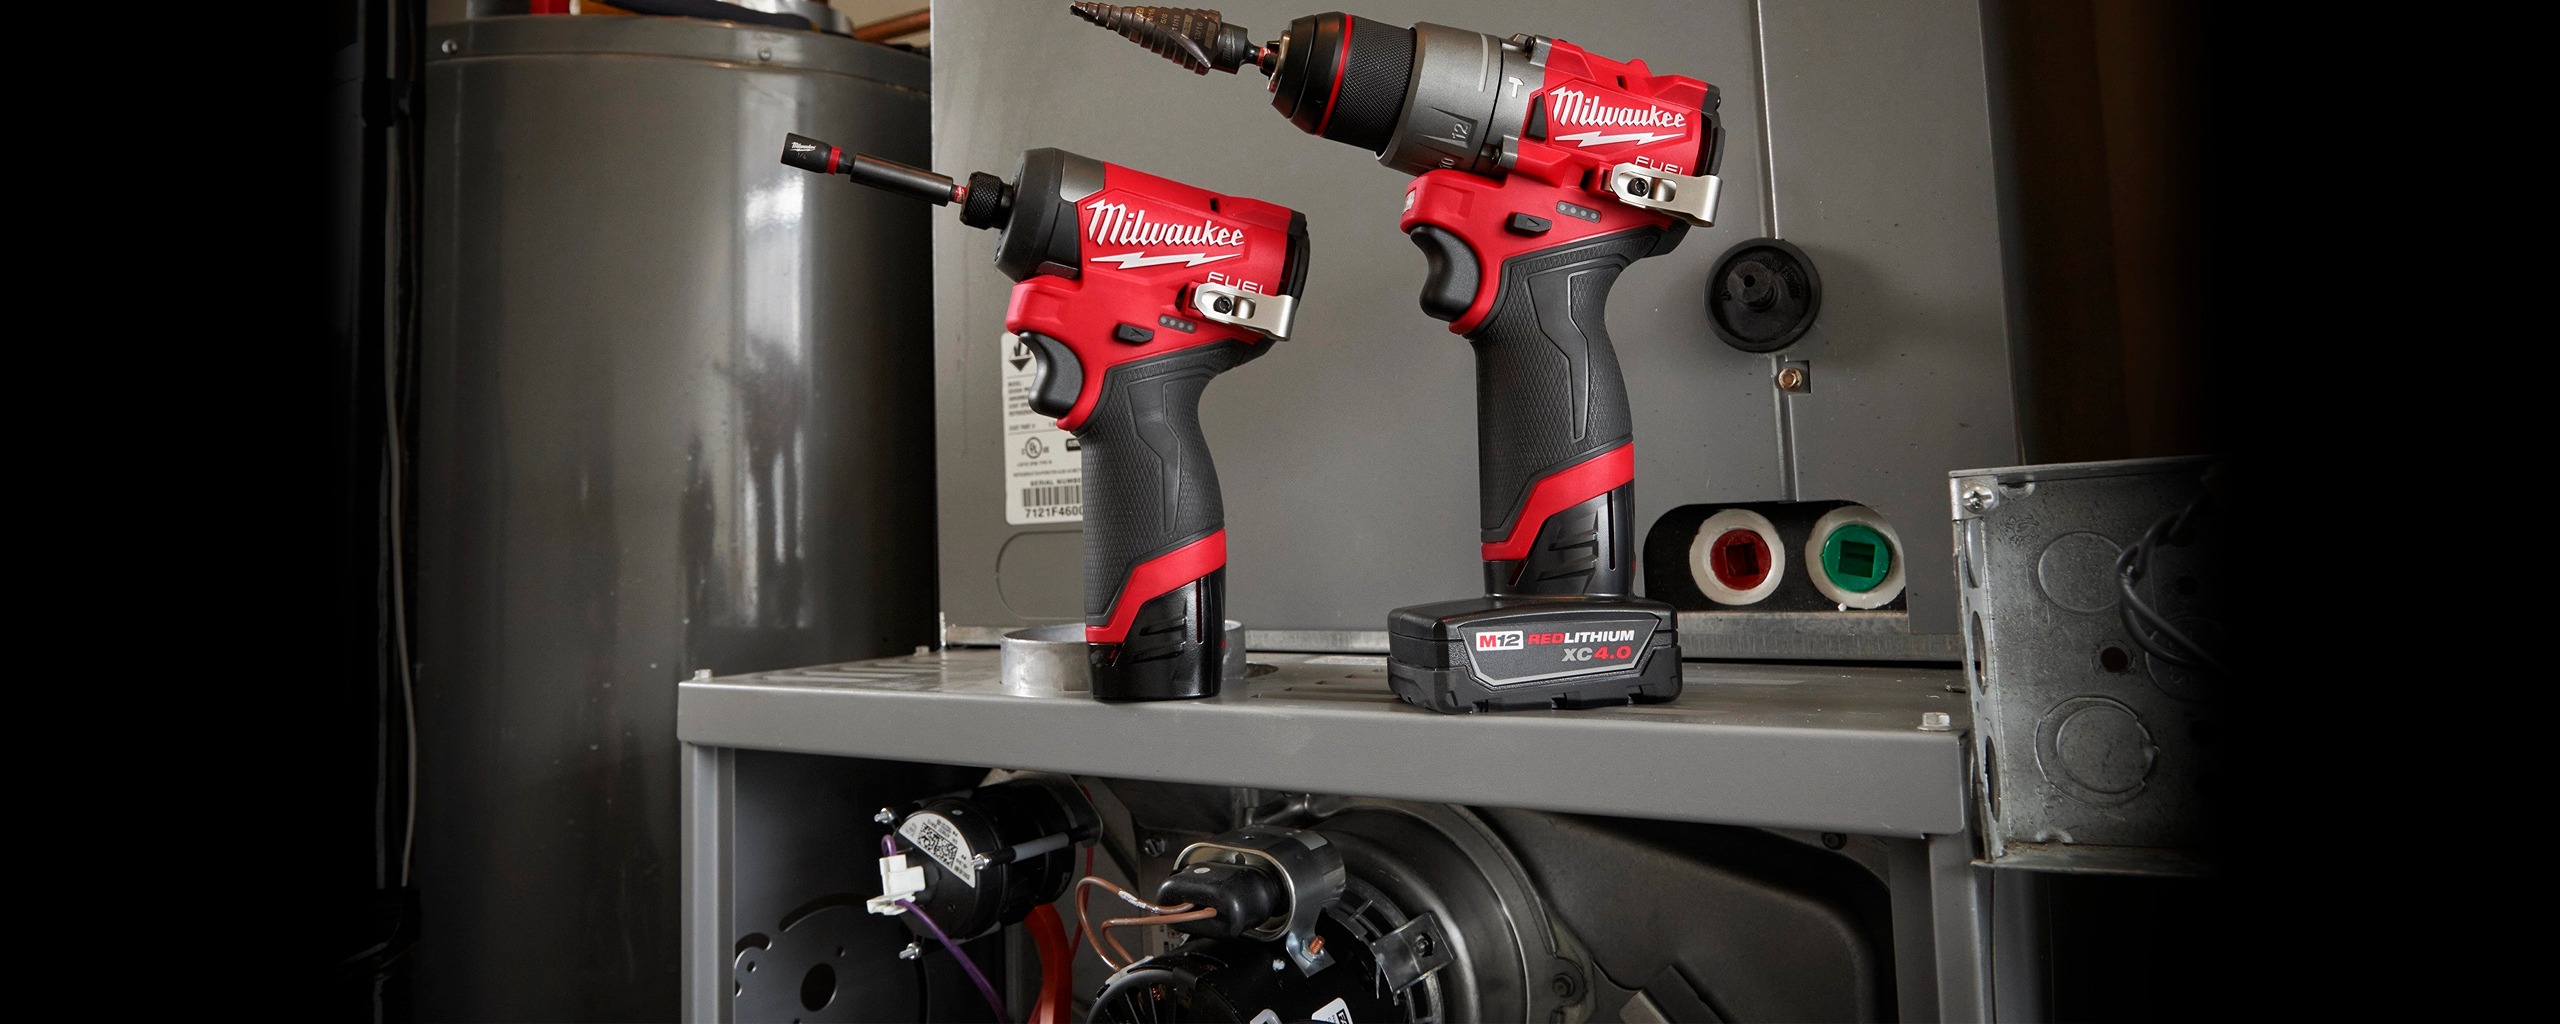 Featured image for “Milwaukee Tools Available at all Lonestar and TAG Locations”